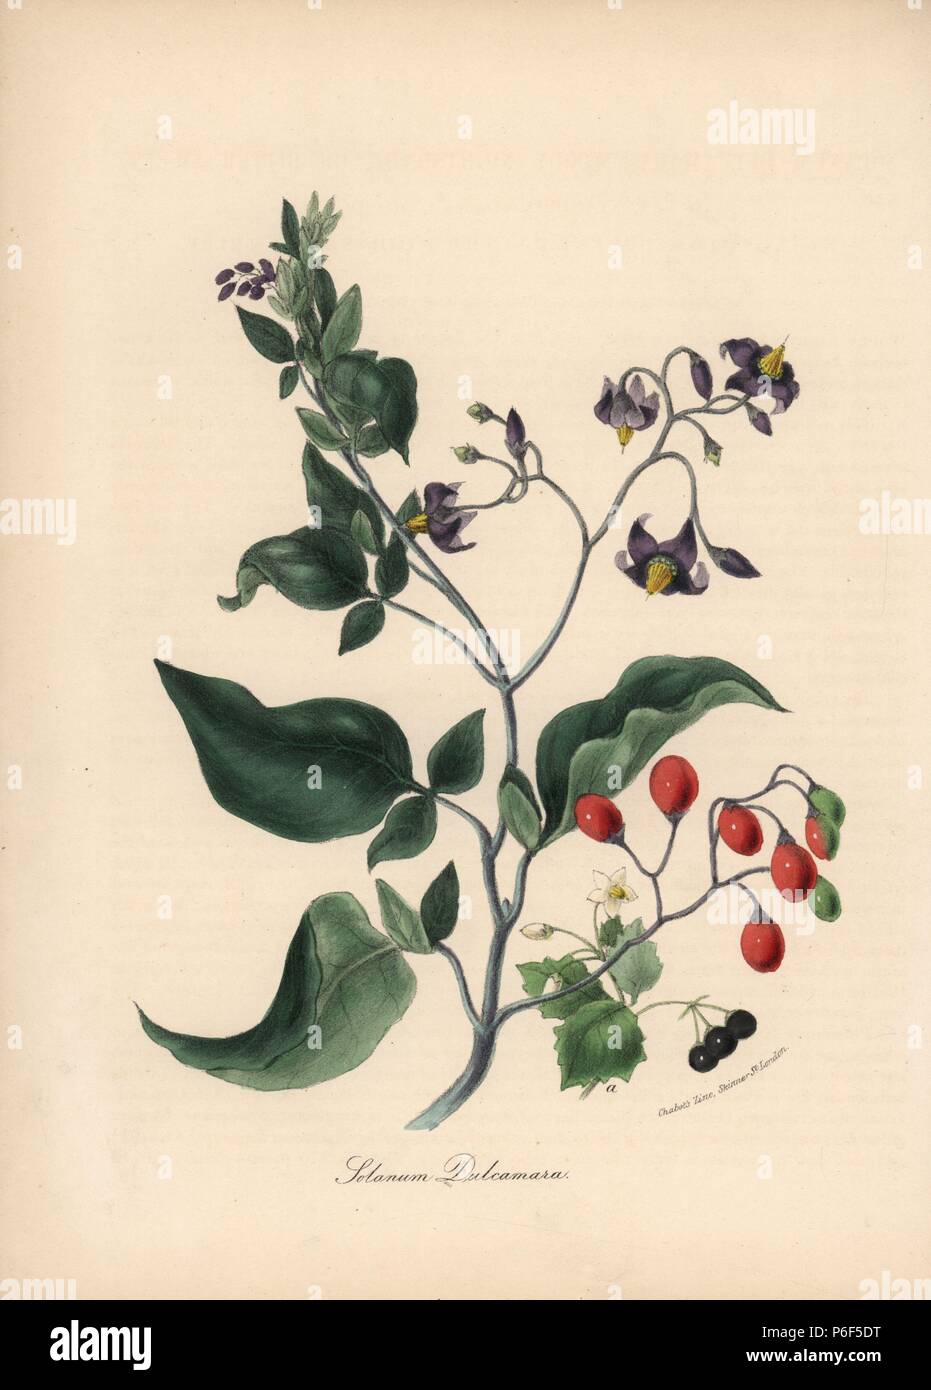 Woody nightshade or bittersweet, Solanum dulcamara, with flower, berry and leaf. Handcoloured zincograph by C. Chabot drawn by Miss M. A. Burnett from her 'Plantae Utiliores: or Illustrations of Useful Plants,' Whittaker, London, 1842. Miss Burnett drew the botanical illustrations, but the text was chiefly by her late brother, British botanist Gilbert Thomas Burnett (1800-1835). Stock Photo